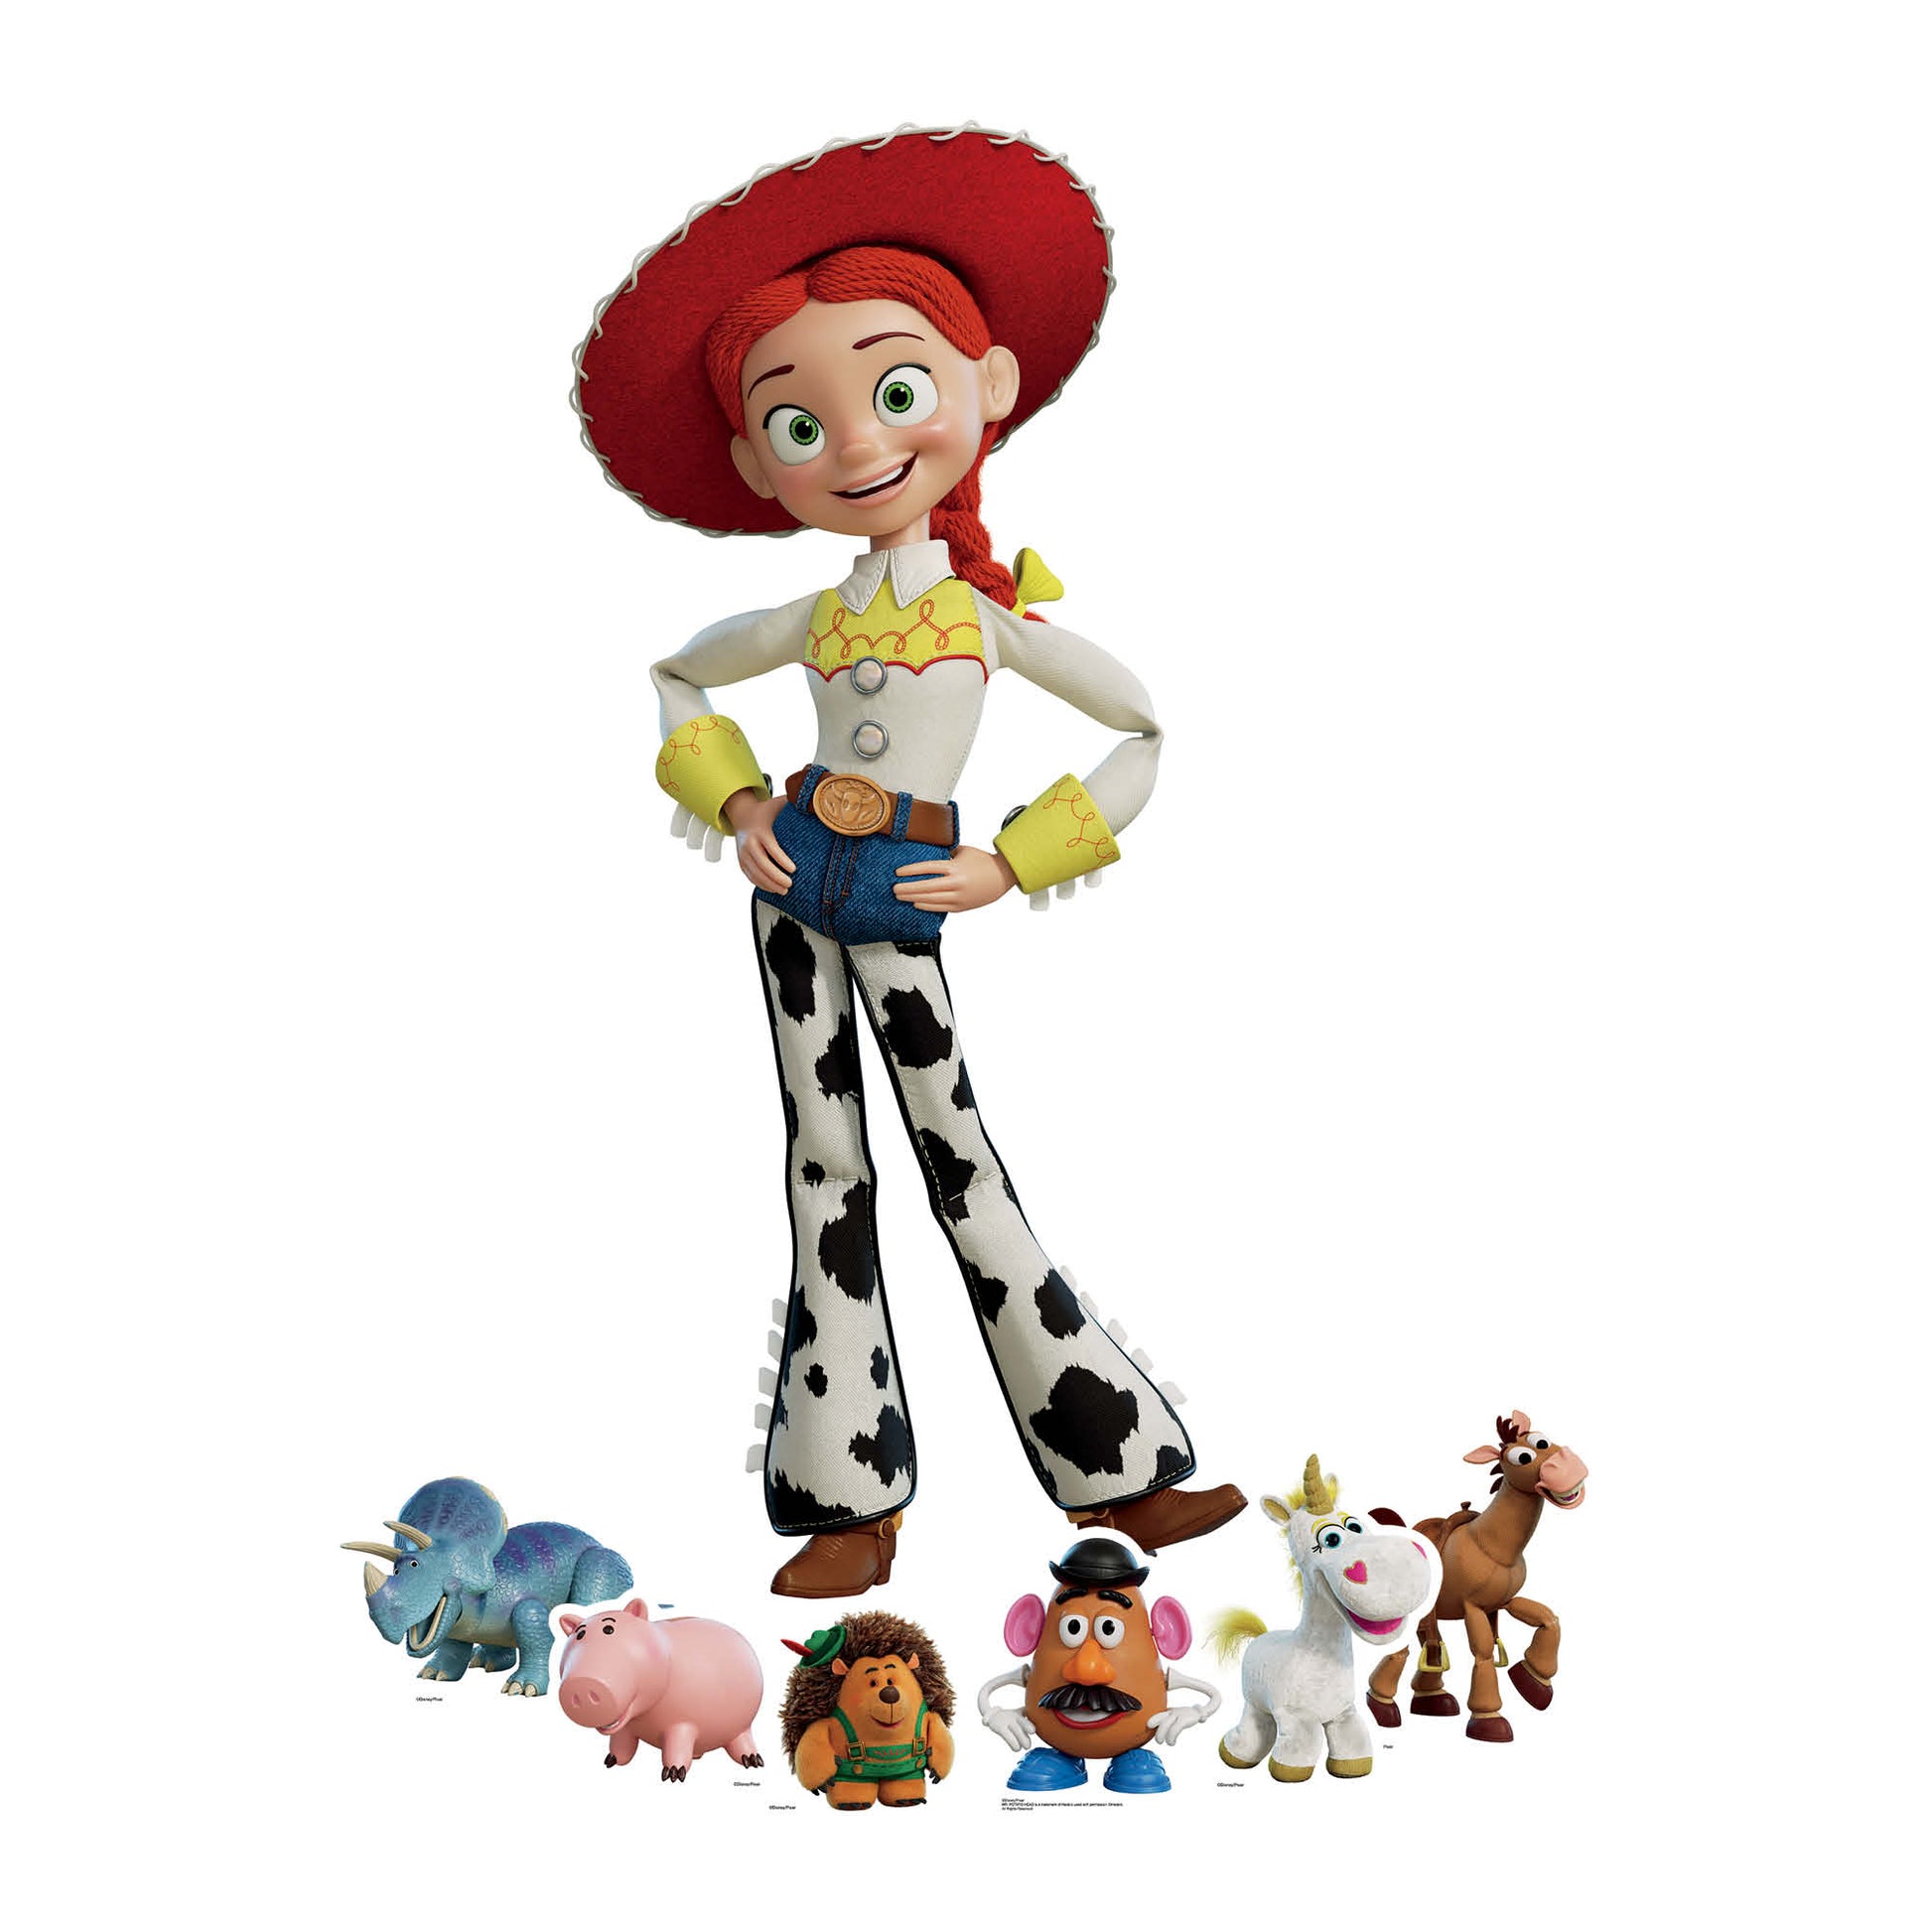 Beautiful Jessie Toy Story Cardboard Cutout Party Decorations